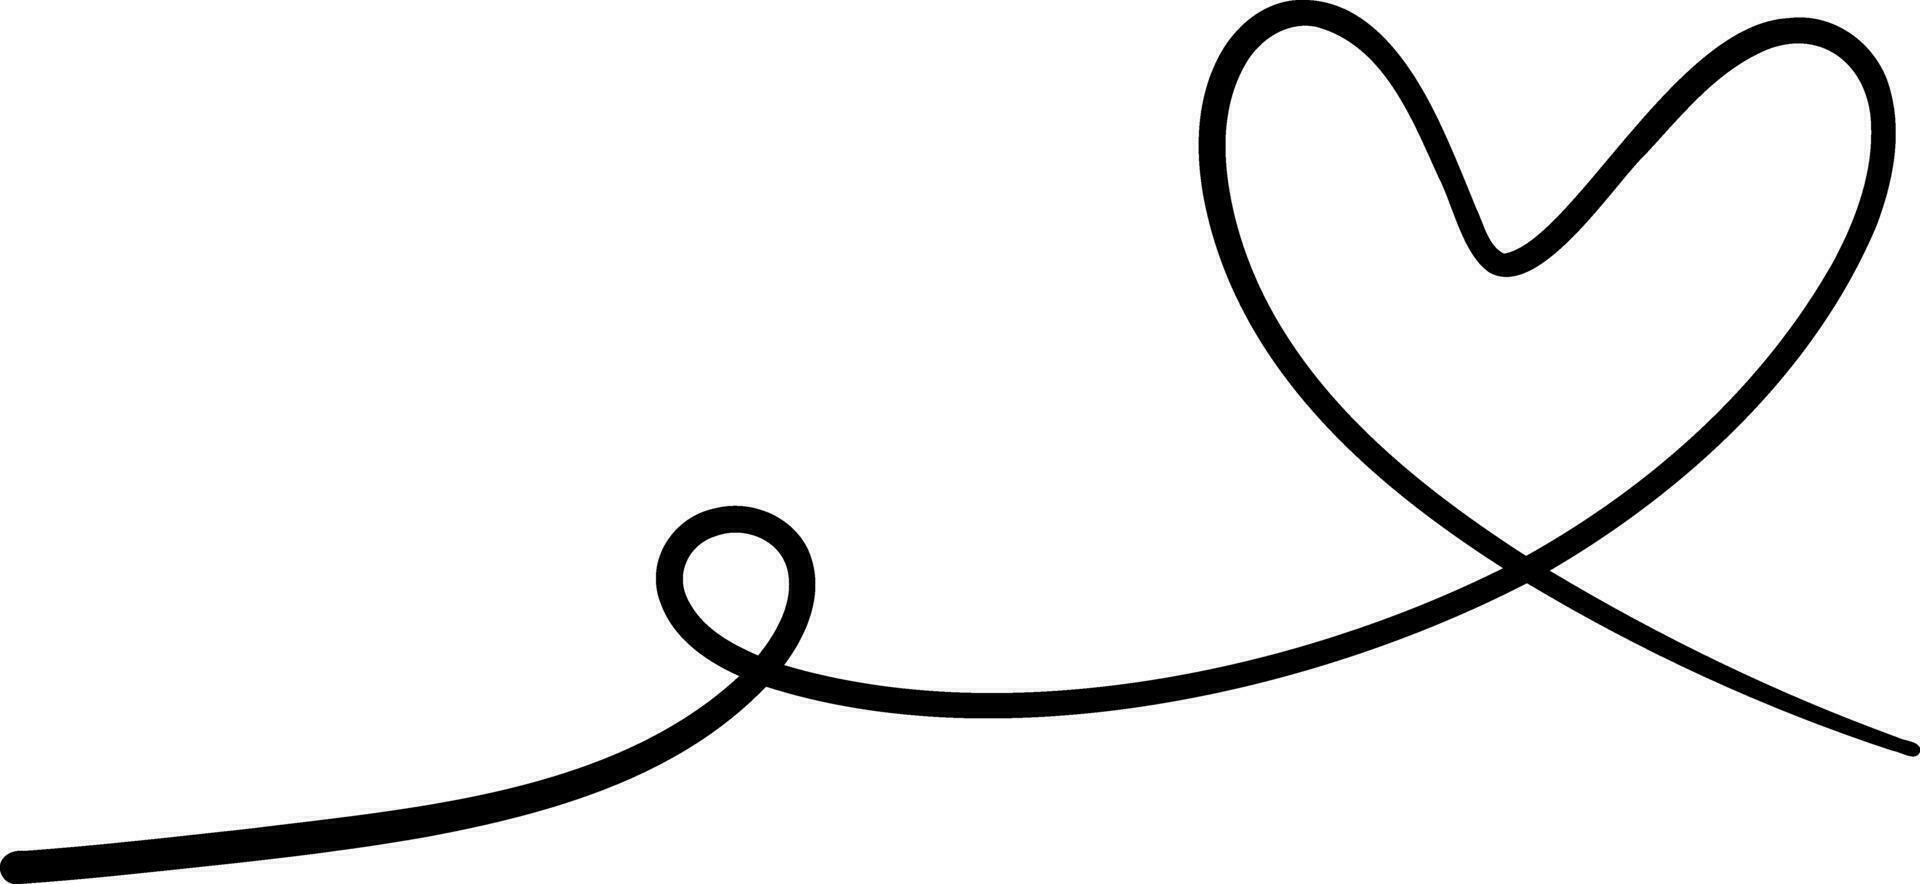 Hand drawn line heart on white background. vector